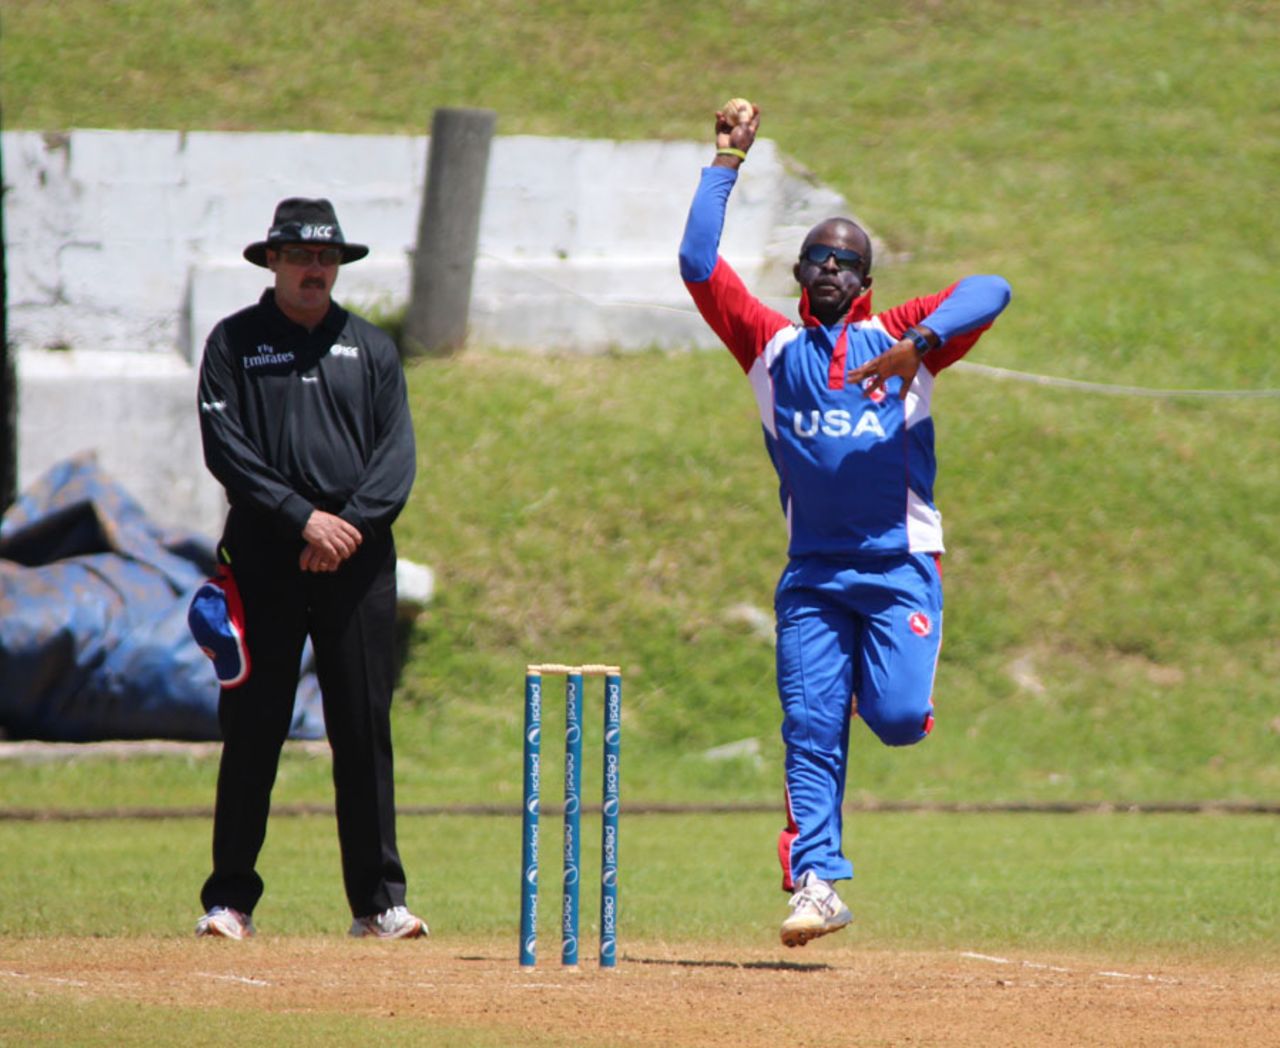 Orlando Baker bounds in with his medium pace, Uganda v United States of America, World Cricket League Division 3, St David's, May 2, 2013
